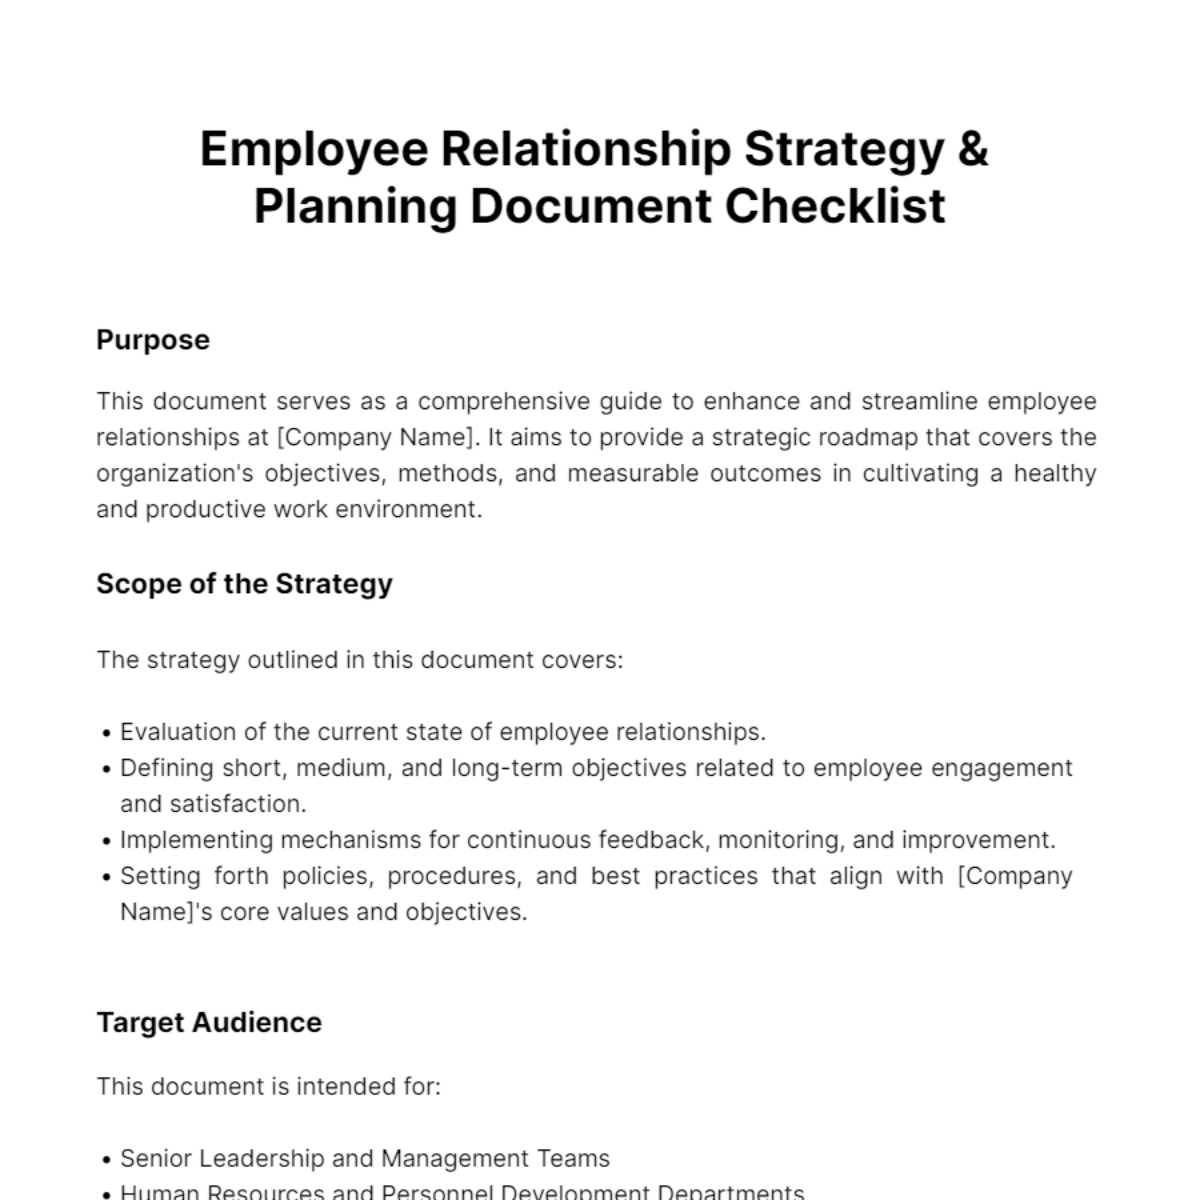 Employee Relationship Strategy & Planning Document HR Template